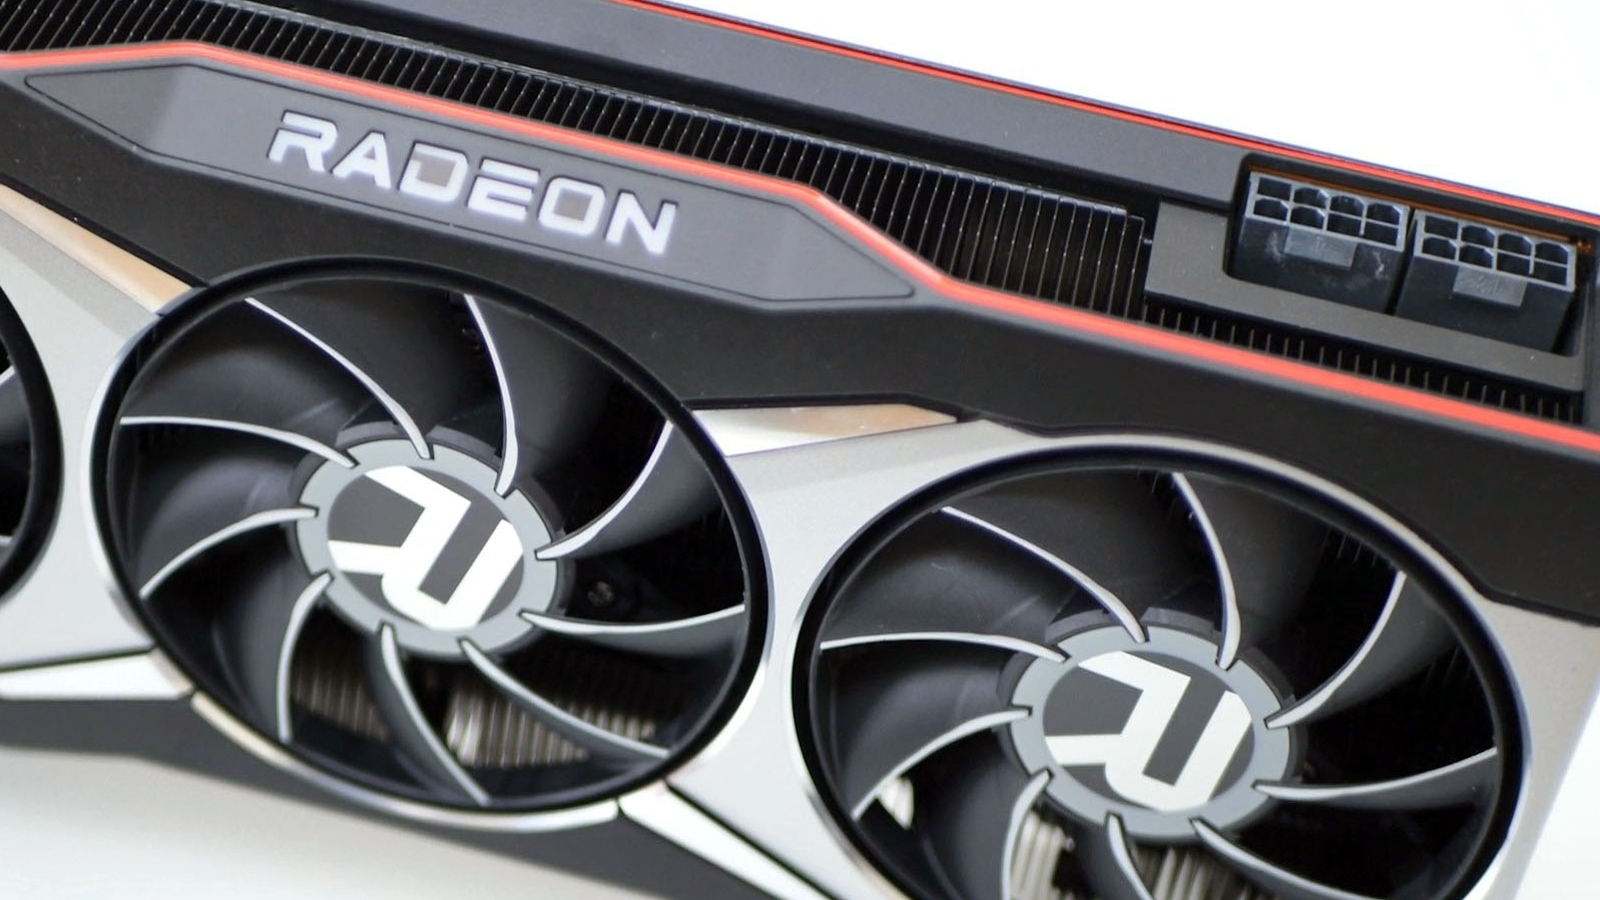 AMD Radeon RX 6900XT Review: Powerful, Yet Ever So Slightly Flawed 